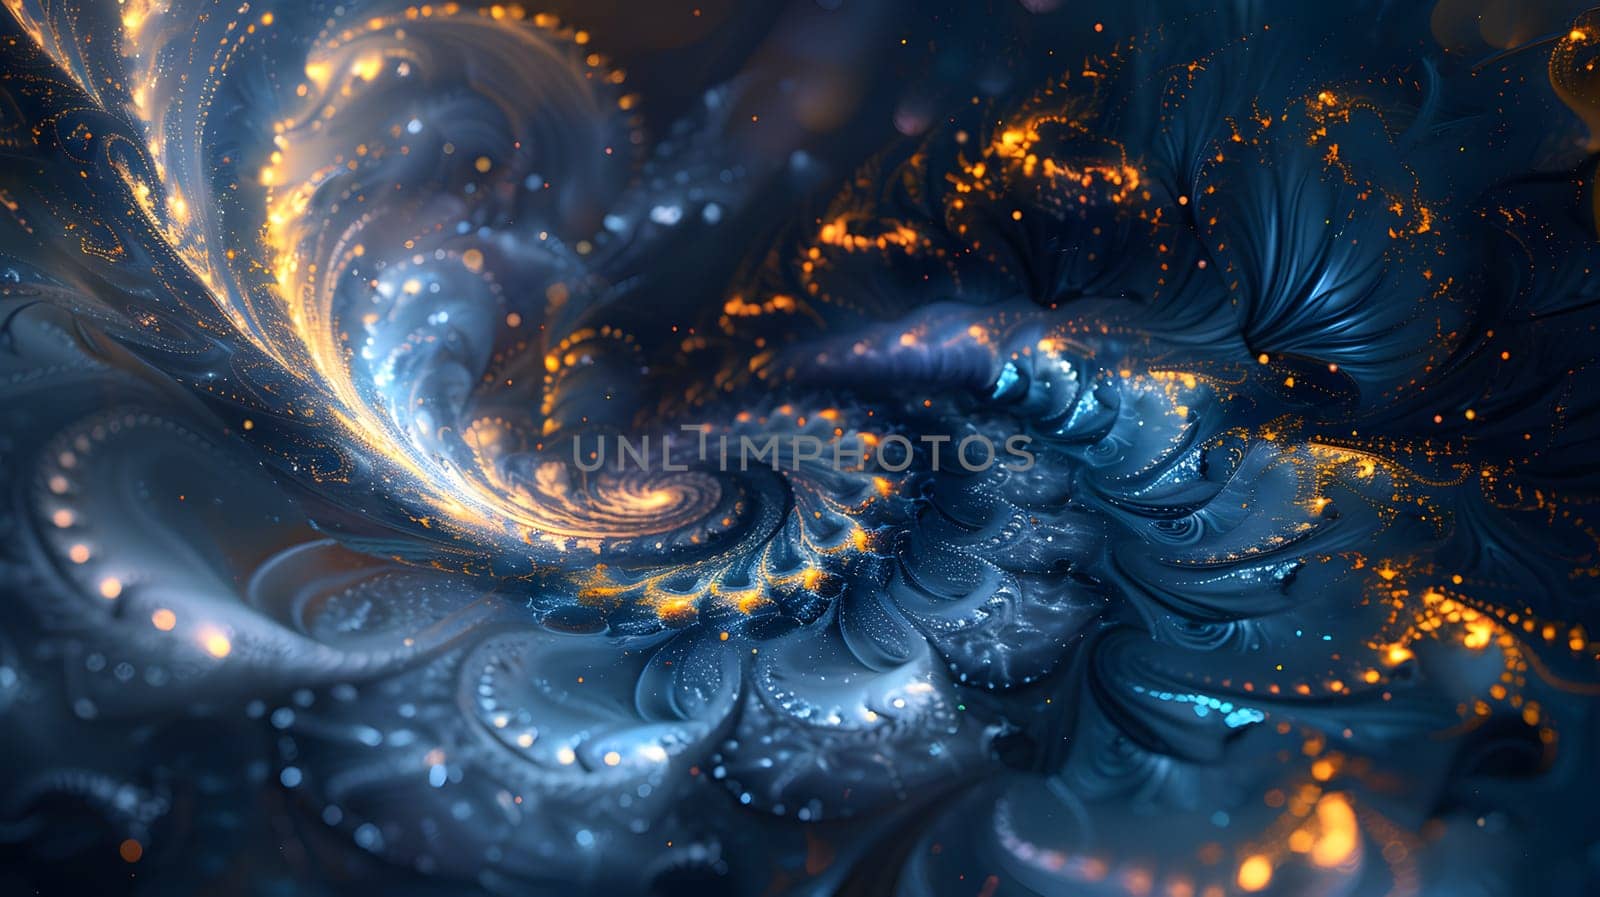 a computer generated image of a blue and orange swirl by Nadtochiy